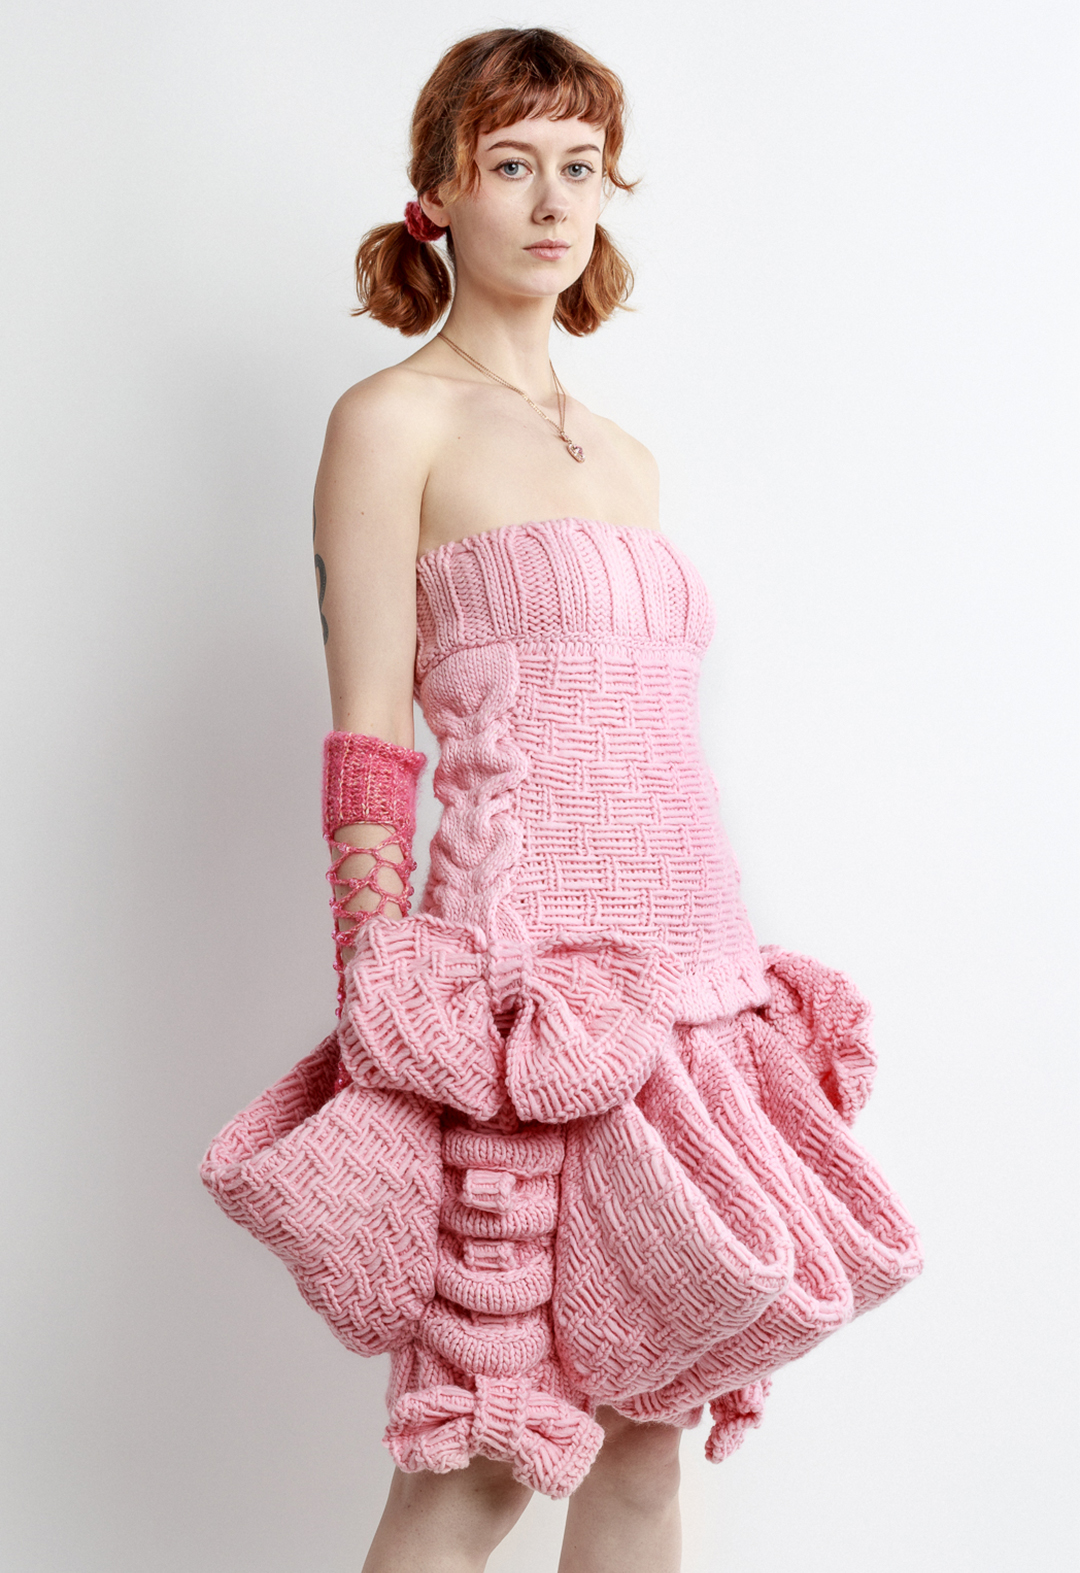 Photo of a girl posing in a pink sleeveless magical girl mini dress, looking to the camera. The dress is hand knit with baby pink wool. The dress features big bows and big pockets circling the skirt of the dress. The dress, and girl, are posed at a three-quarter view to the camera. The girl is wearing crochet fishnet gloves, pigtails, and a heart necklace. The dress is angled so that the biggest bow trim is directly in view.